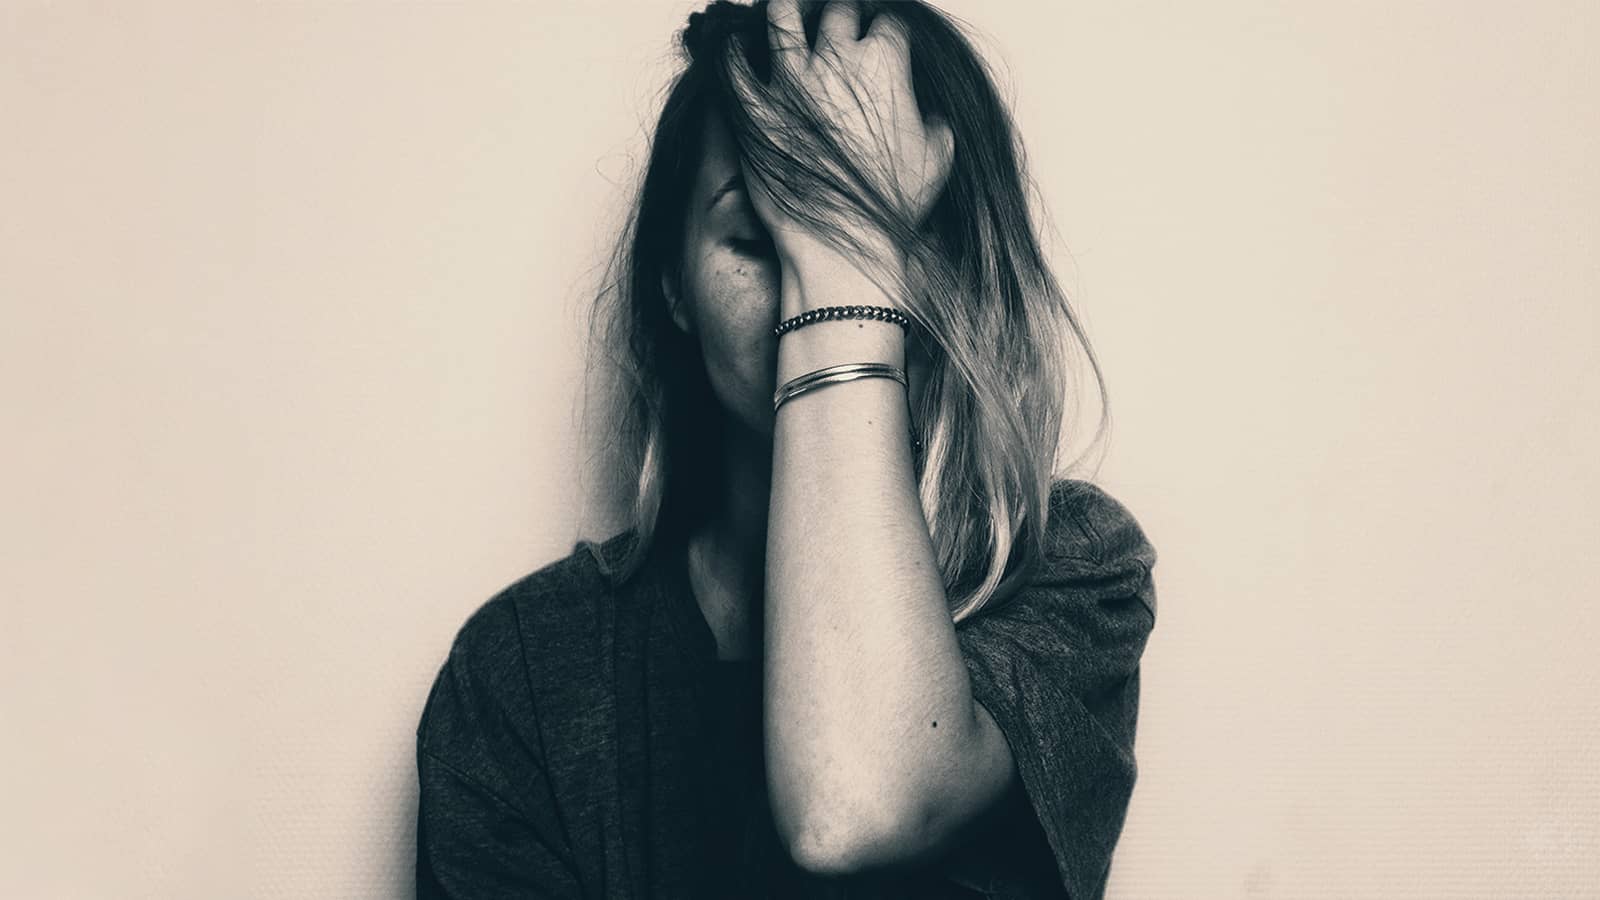 Is a Depressed Person Hiding Their Depression? 10 Red Flags to Watch For